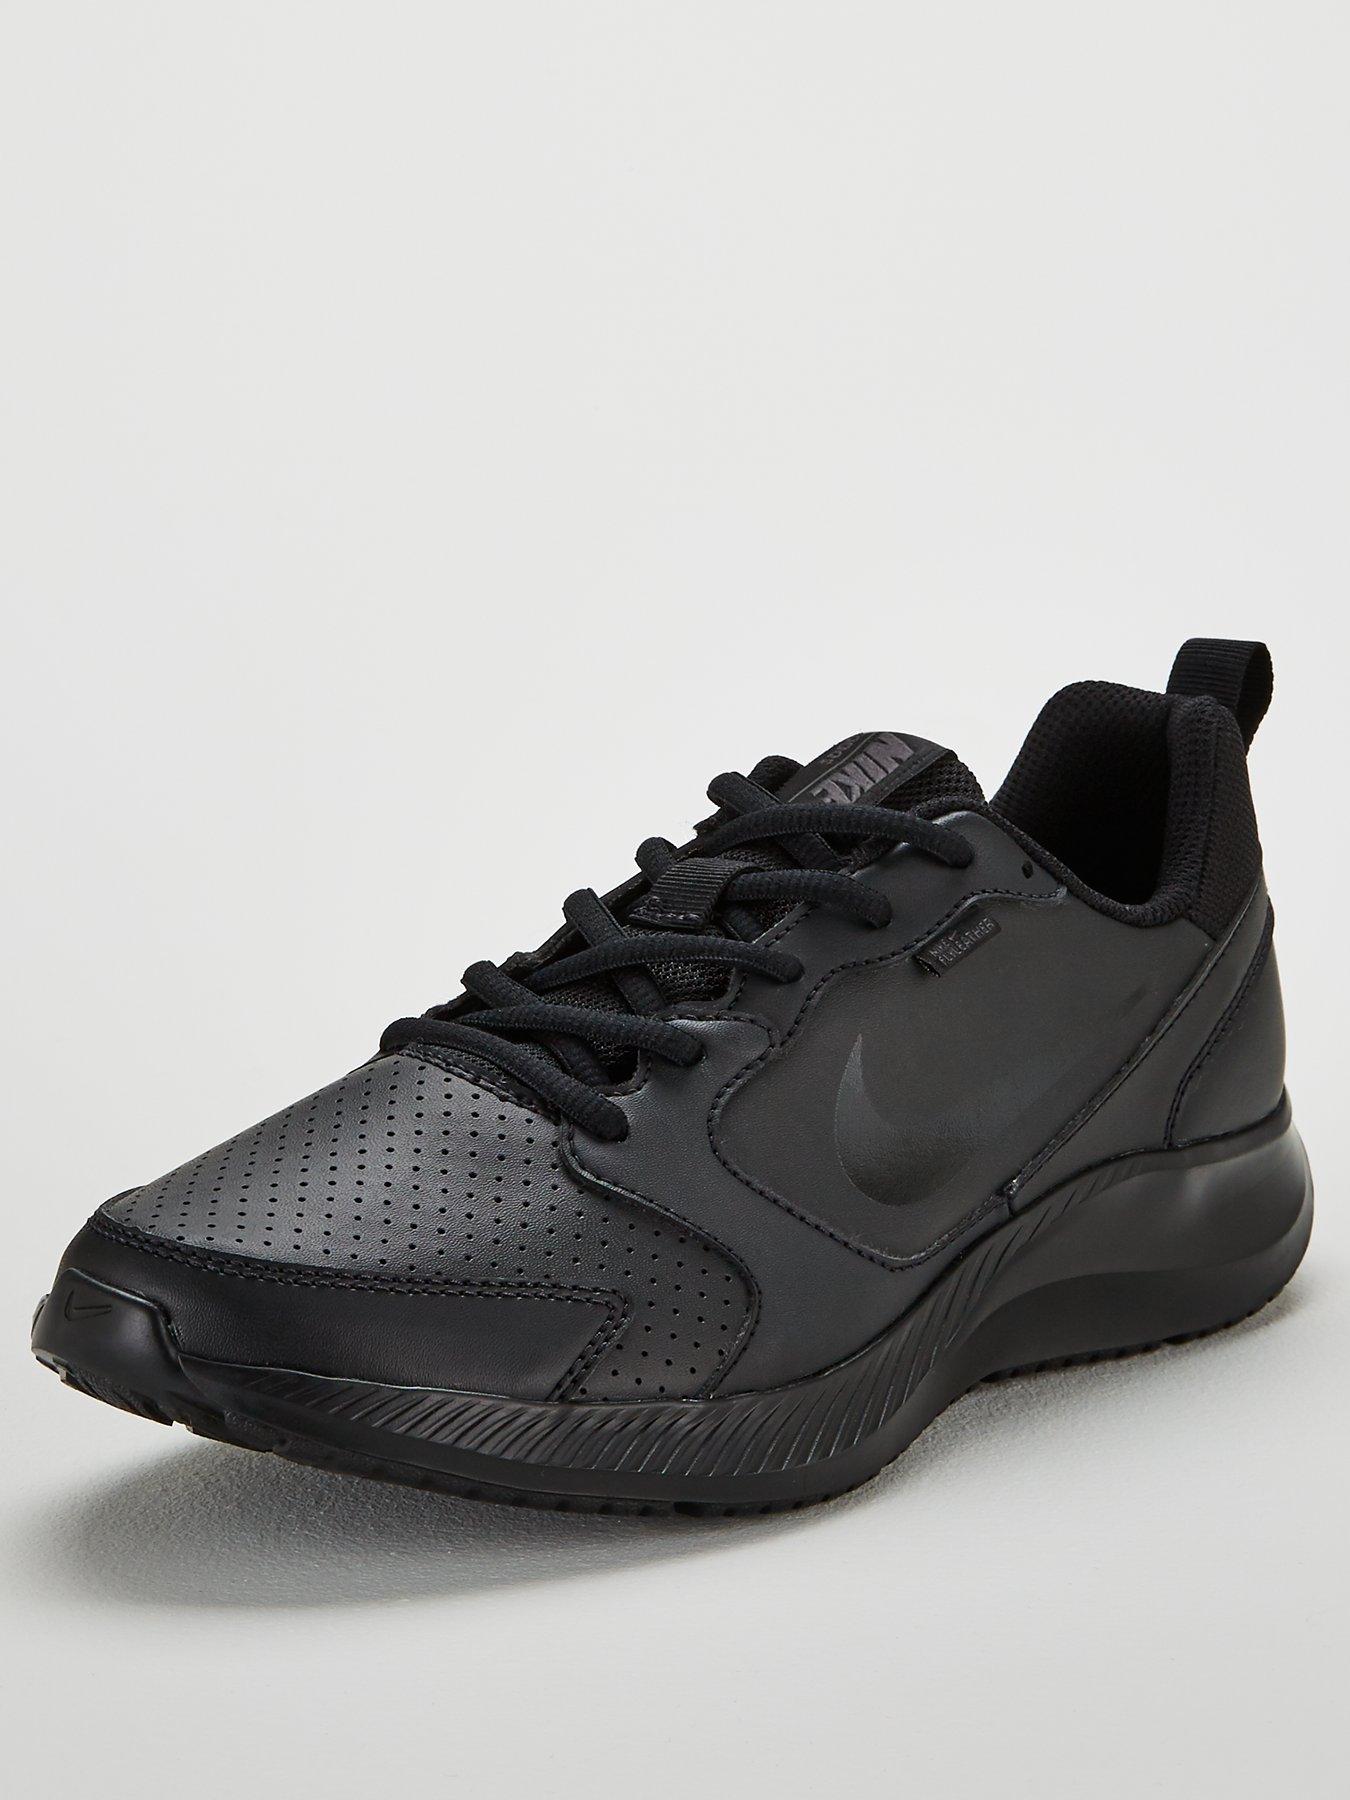 womens leather nike trainers